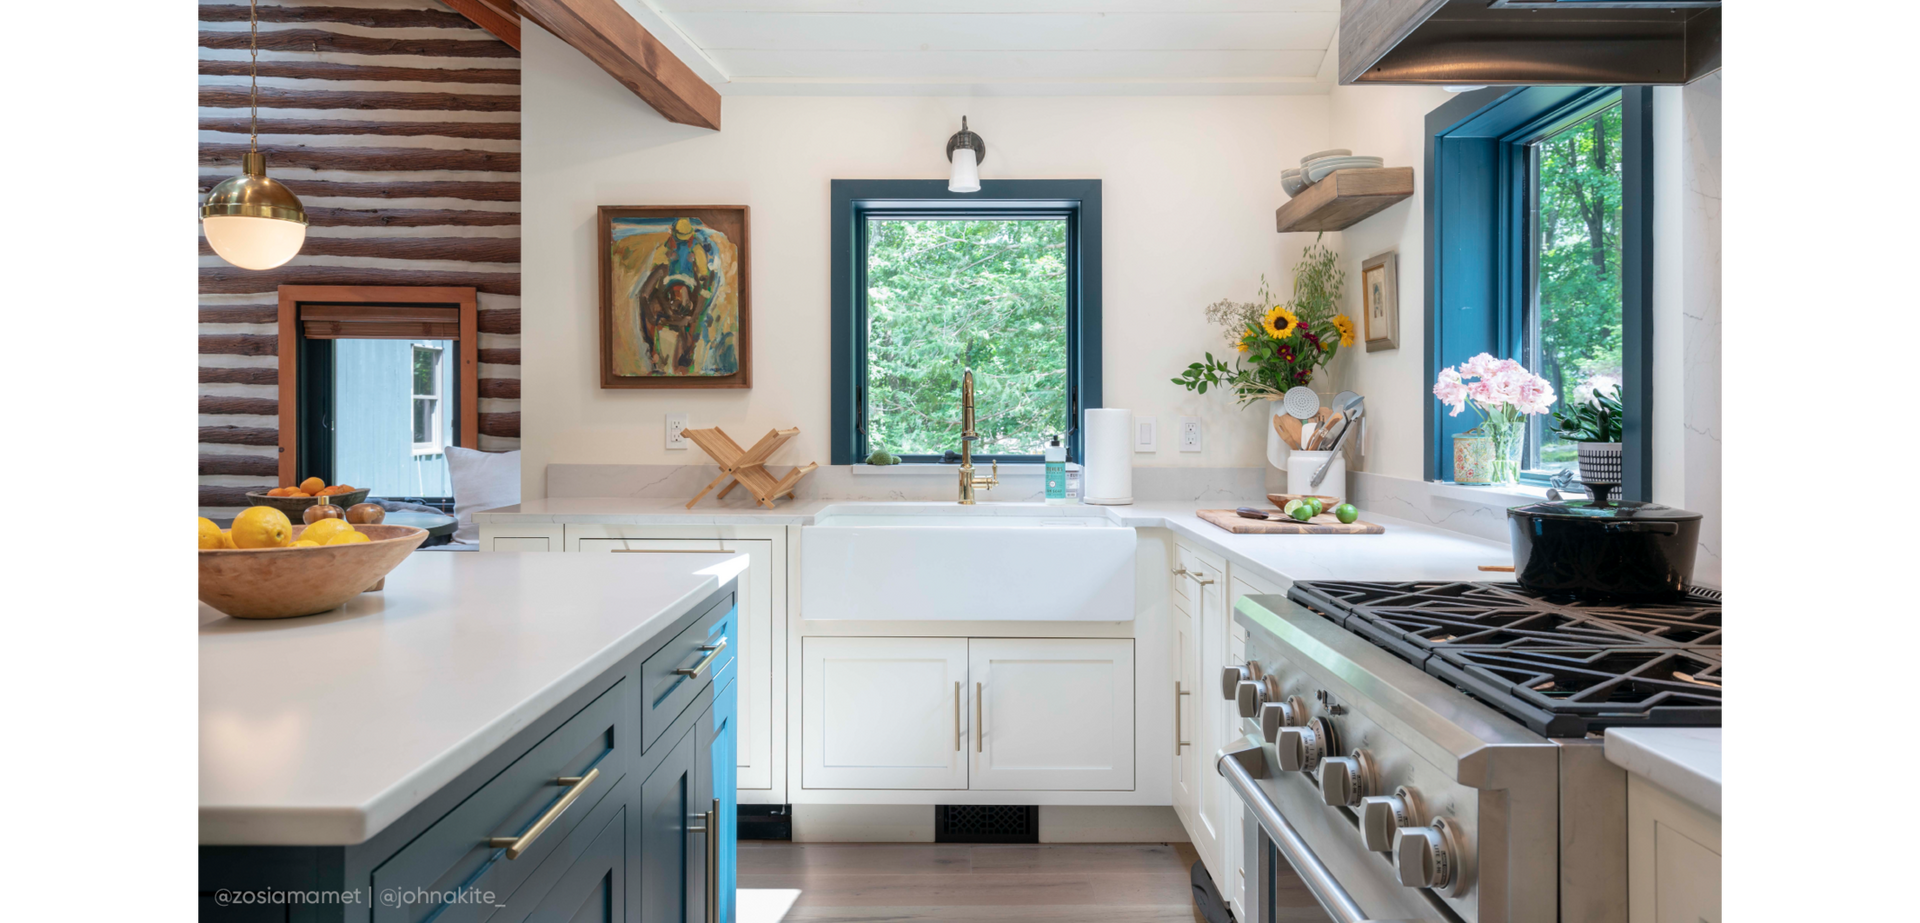 Kitchen of Zosia Mamet & Evan Jonigkeit with the Southgate Pull-Down Kitchen Faucet in Polished Brass, 36" Mitzy Farmhouse Sink